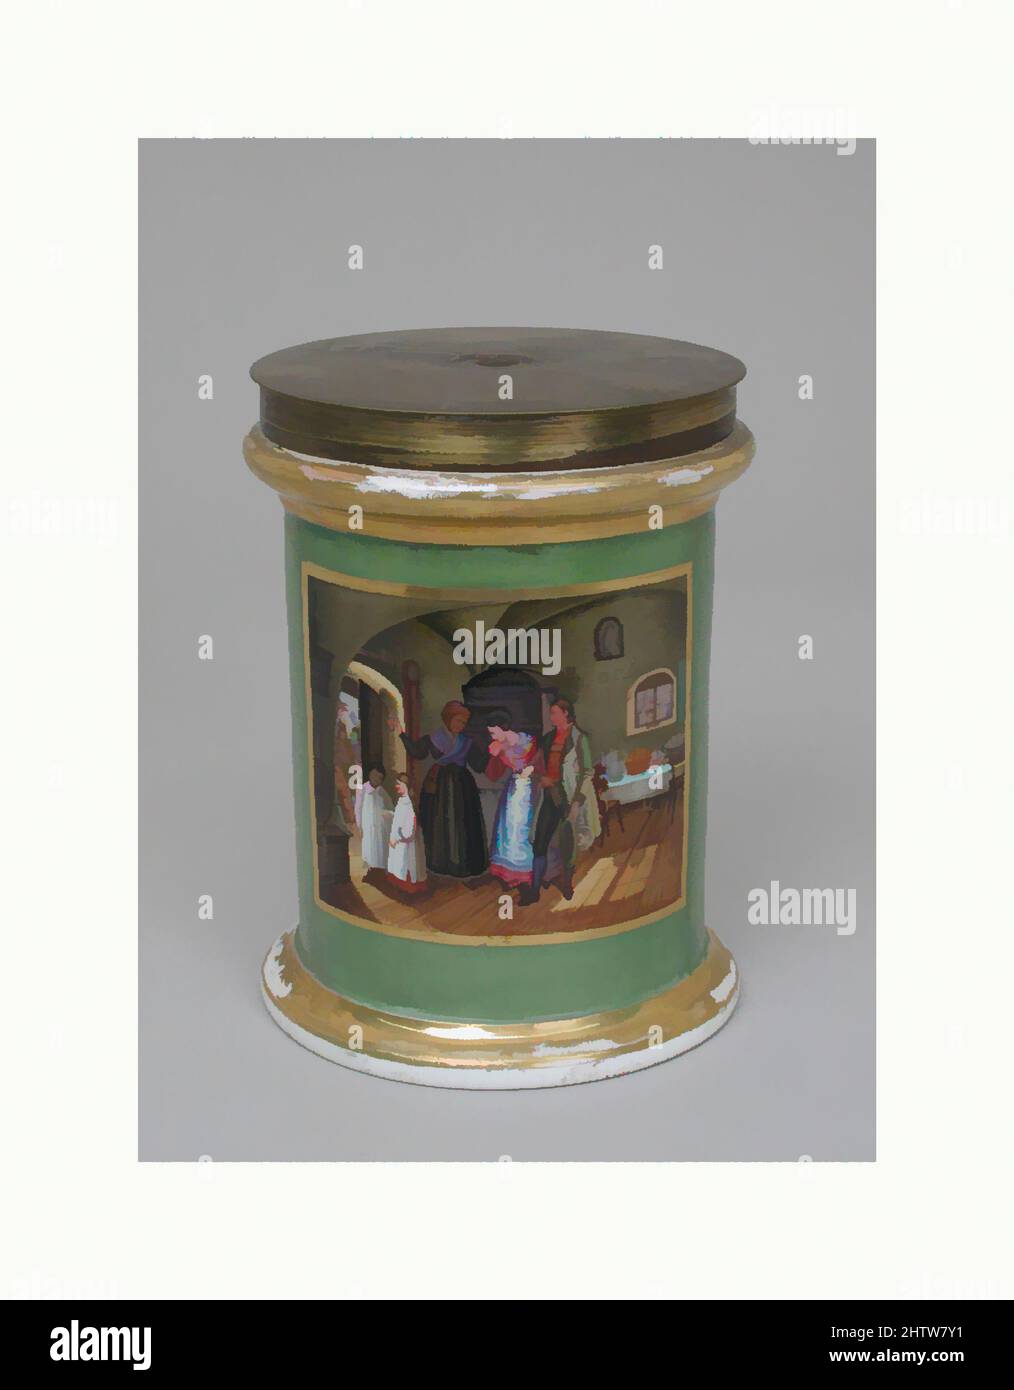 Art inspired by Cylindrical jar, 1842, Austrian, Hard-paste porcelain, Height: 6 3/8 in. (16.2 cm), Ceramics-Porcelain, Classic works modernized by Artotop with a splash of modernity. Shapes, color and value, eye-catching visual impact on art. Emotions through freedom of artworks in a contemporary way. A timeless message pursuing a wildly creative new direction. Artists turning to the digital medium and creating the Artotop NFT Stock Photo